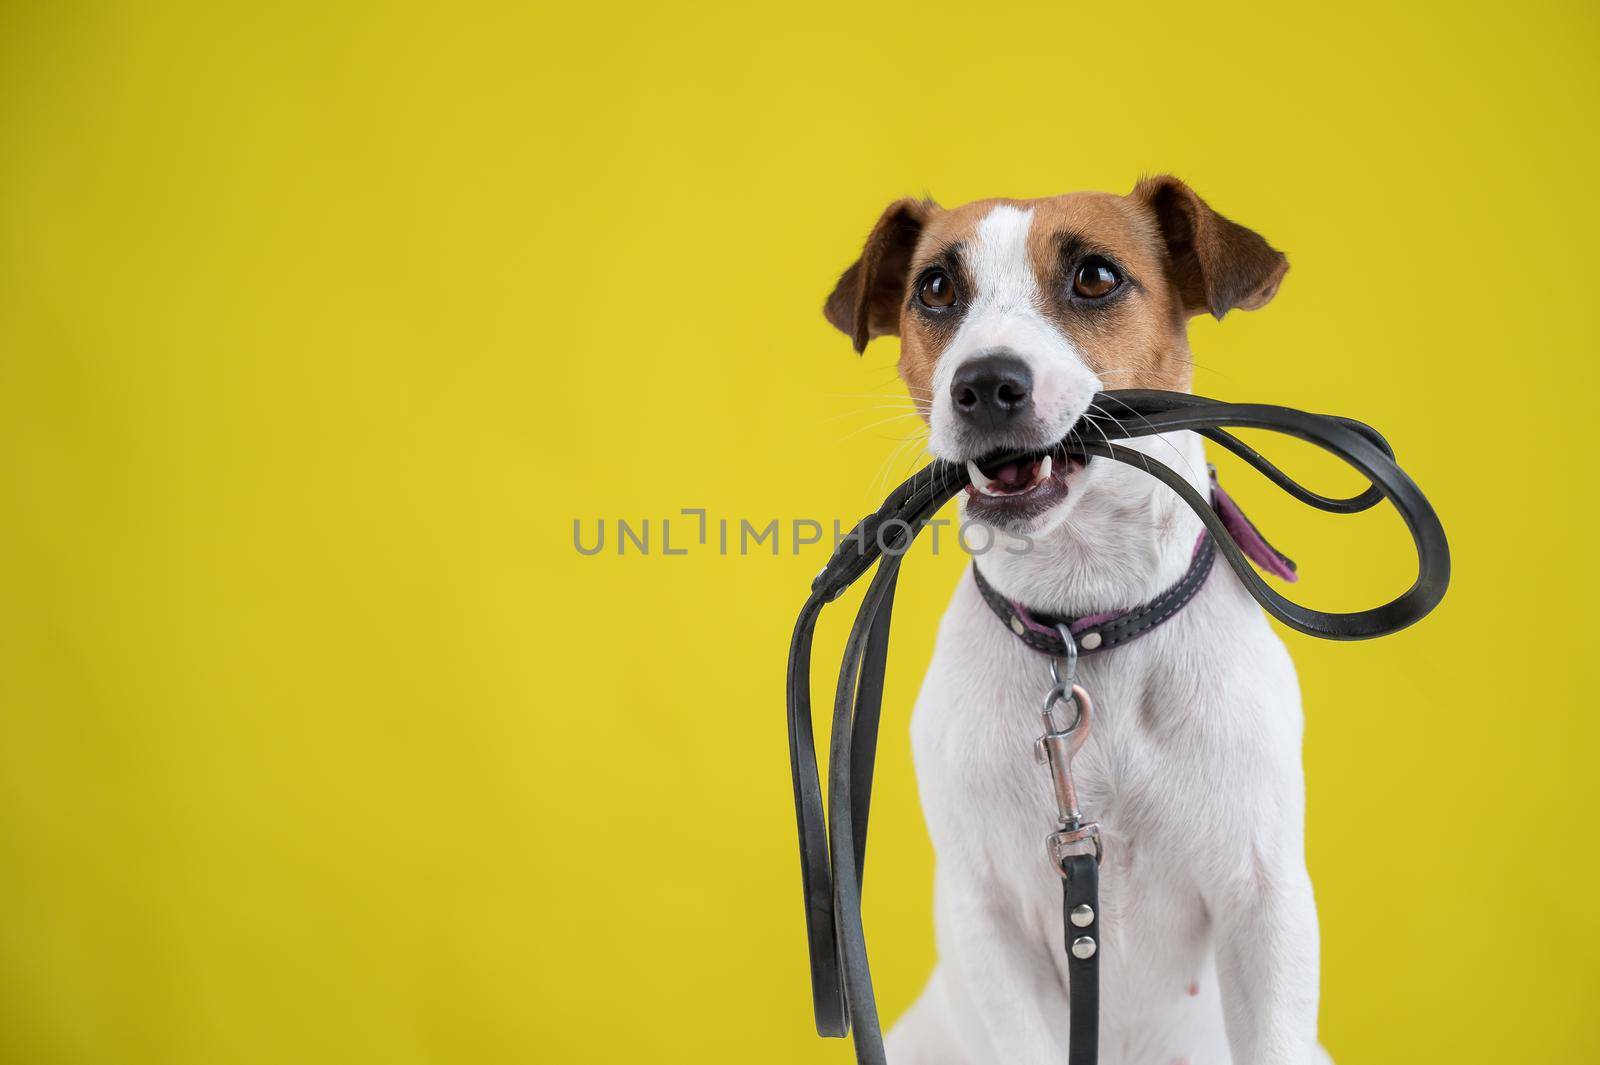 The dog is holding a leash on a yellow background. Jack Russell Terrier calls the owner for a walk. by mrwed54